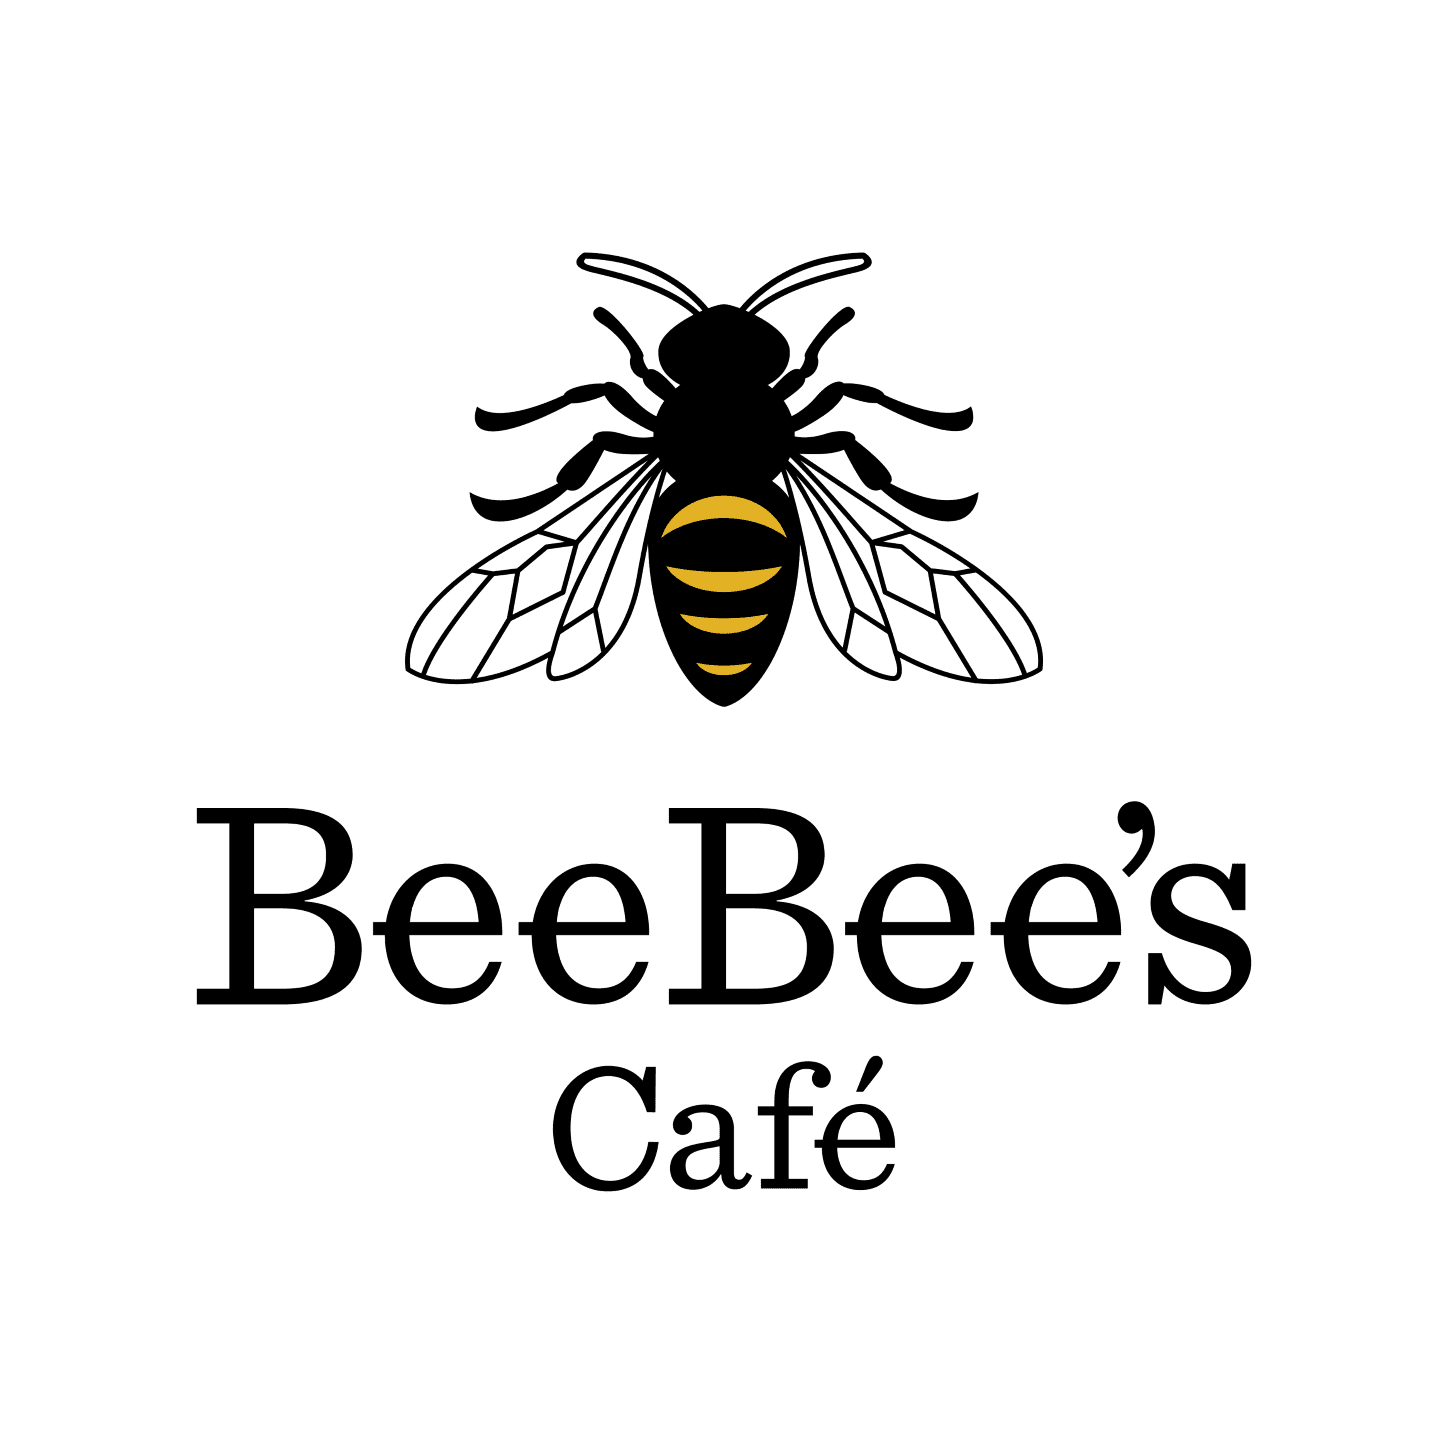 BeeBee's Cafe at The Club at ArrowCreek